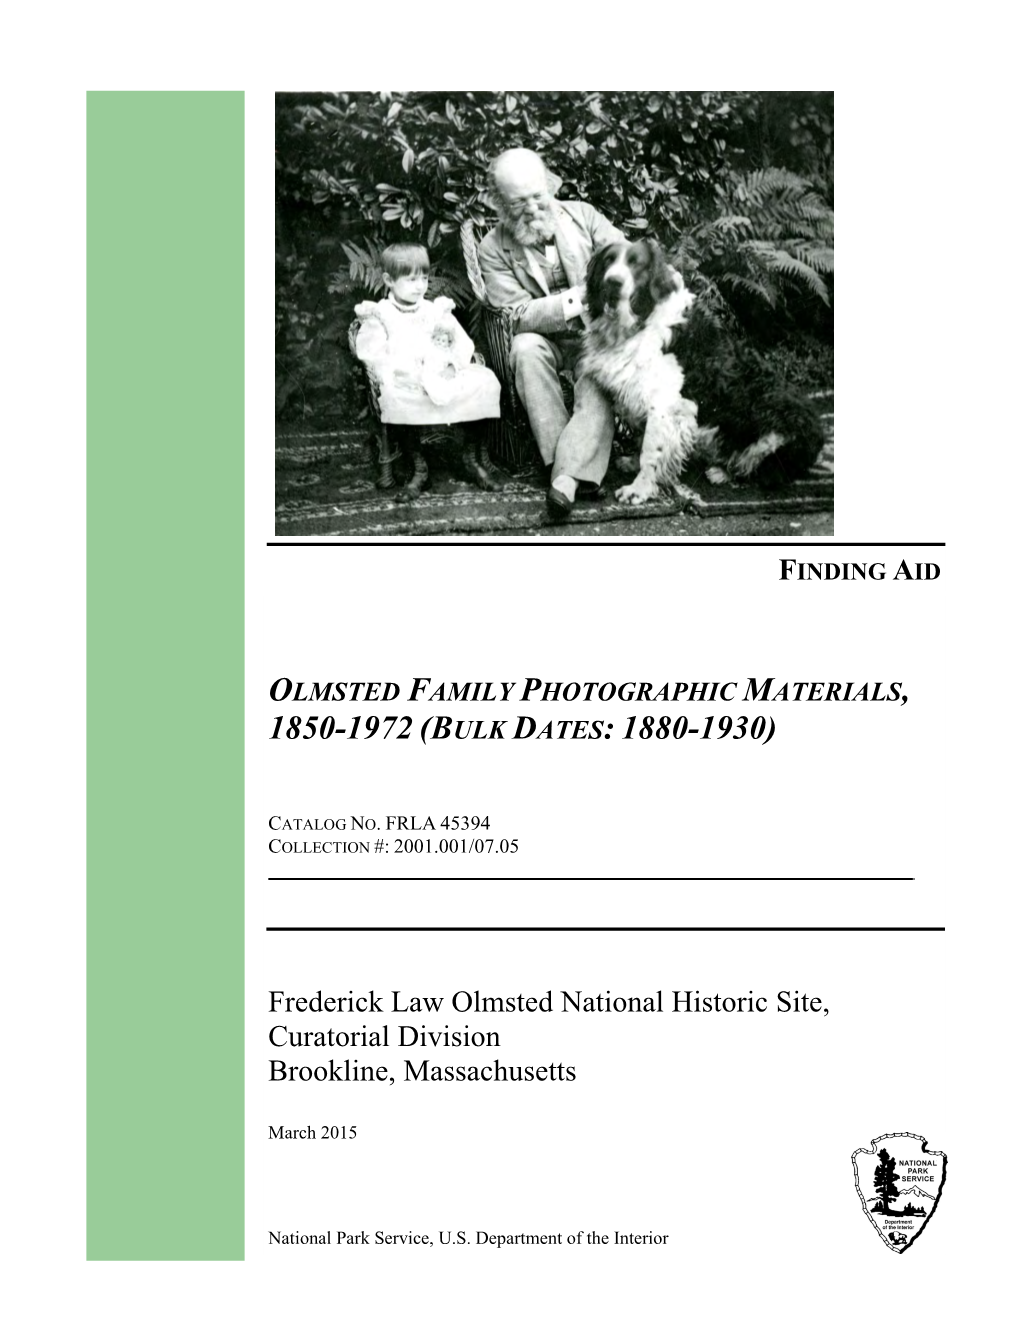 Finding Aid to the Olmsted Family Photographic Materials, 1850-1972